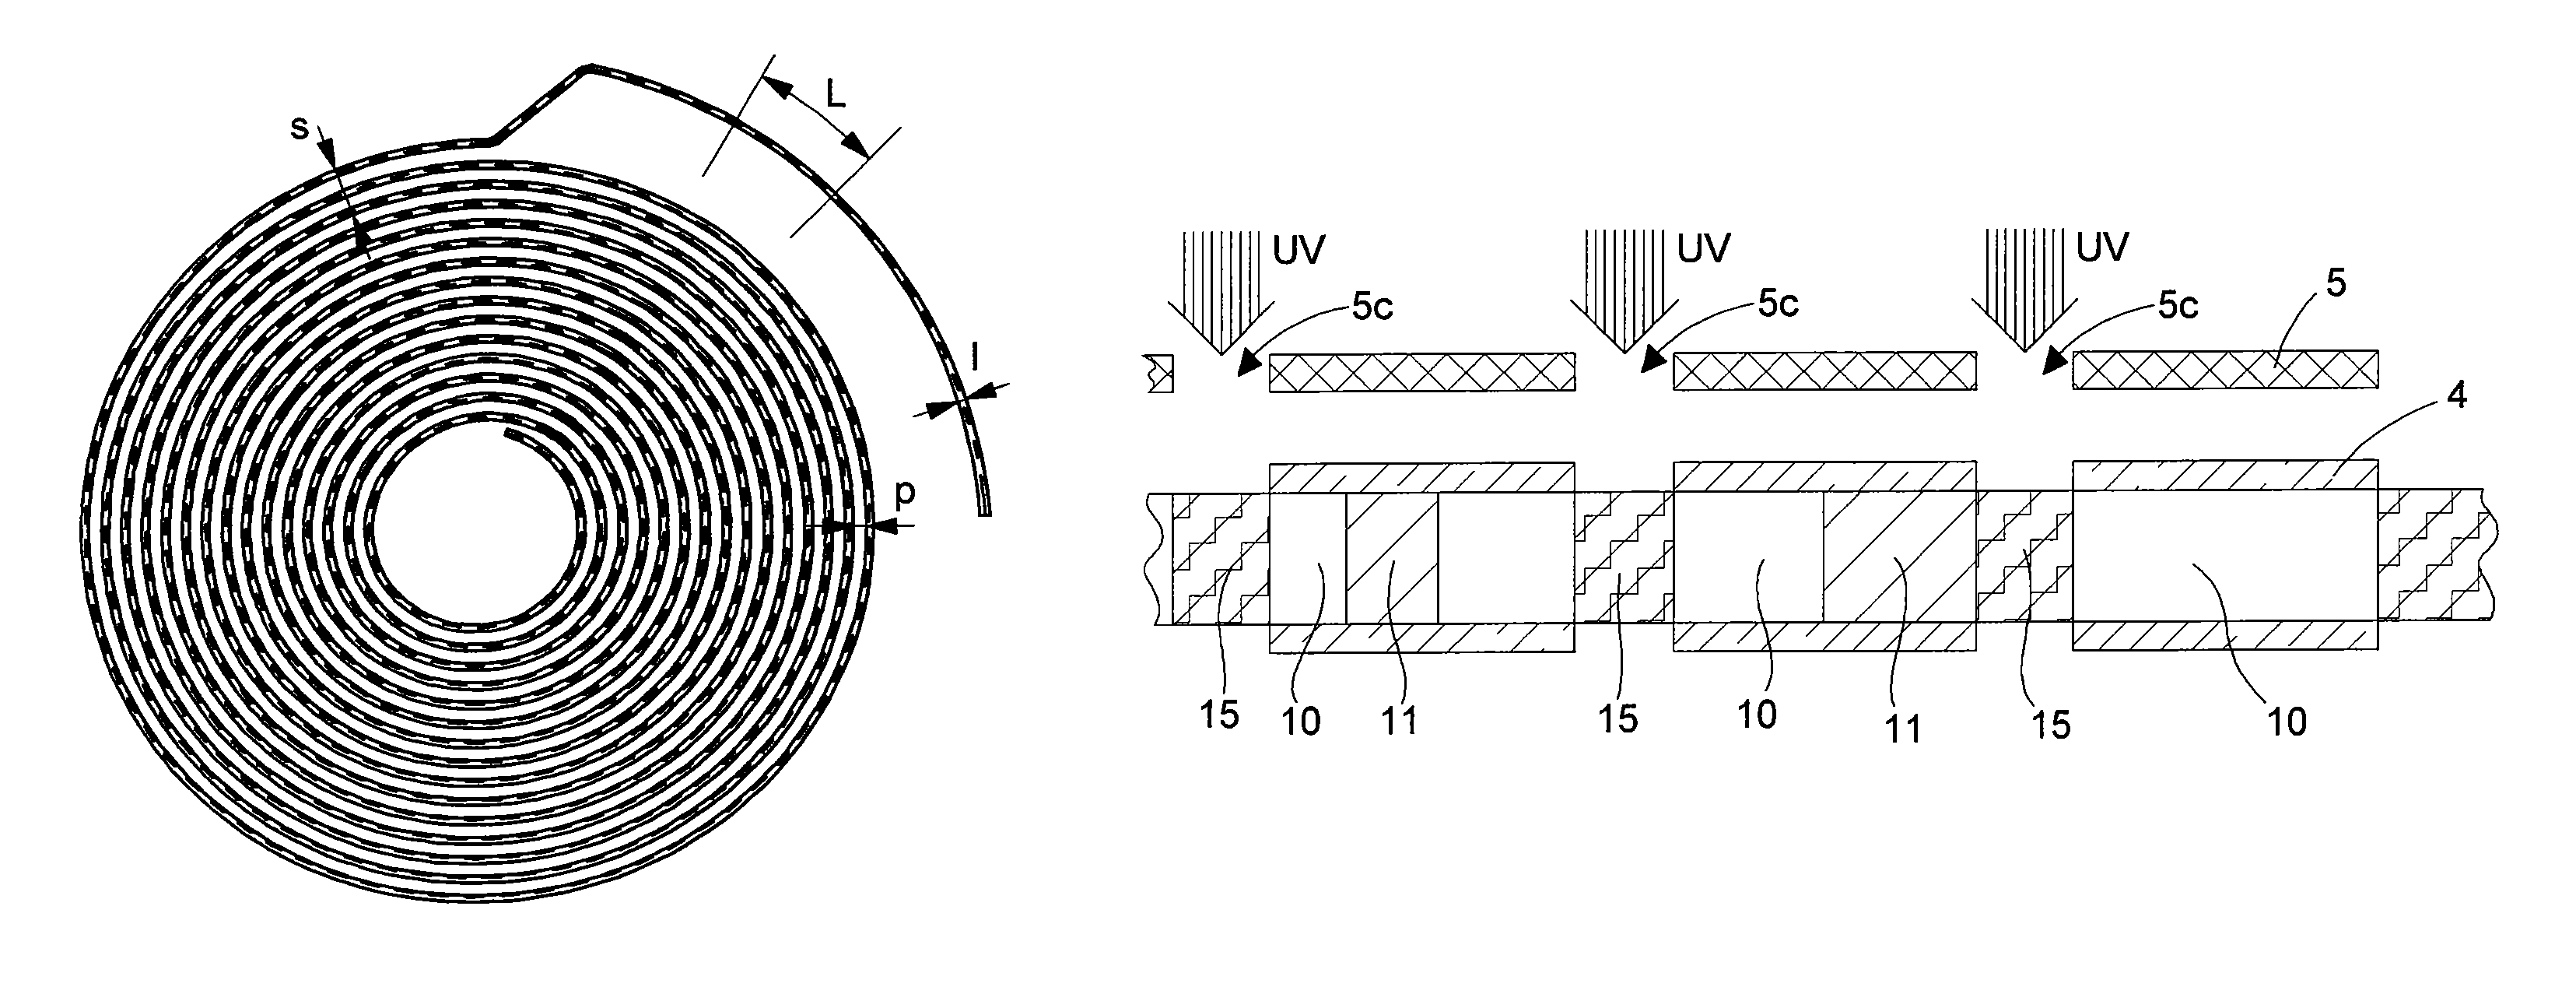 Spiral spring made of athermal glass for clockwork movement and method for making same